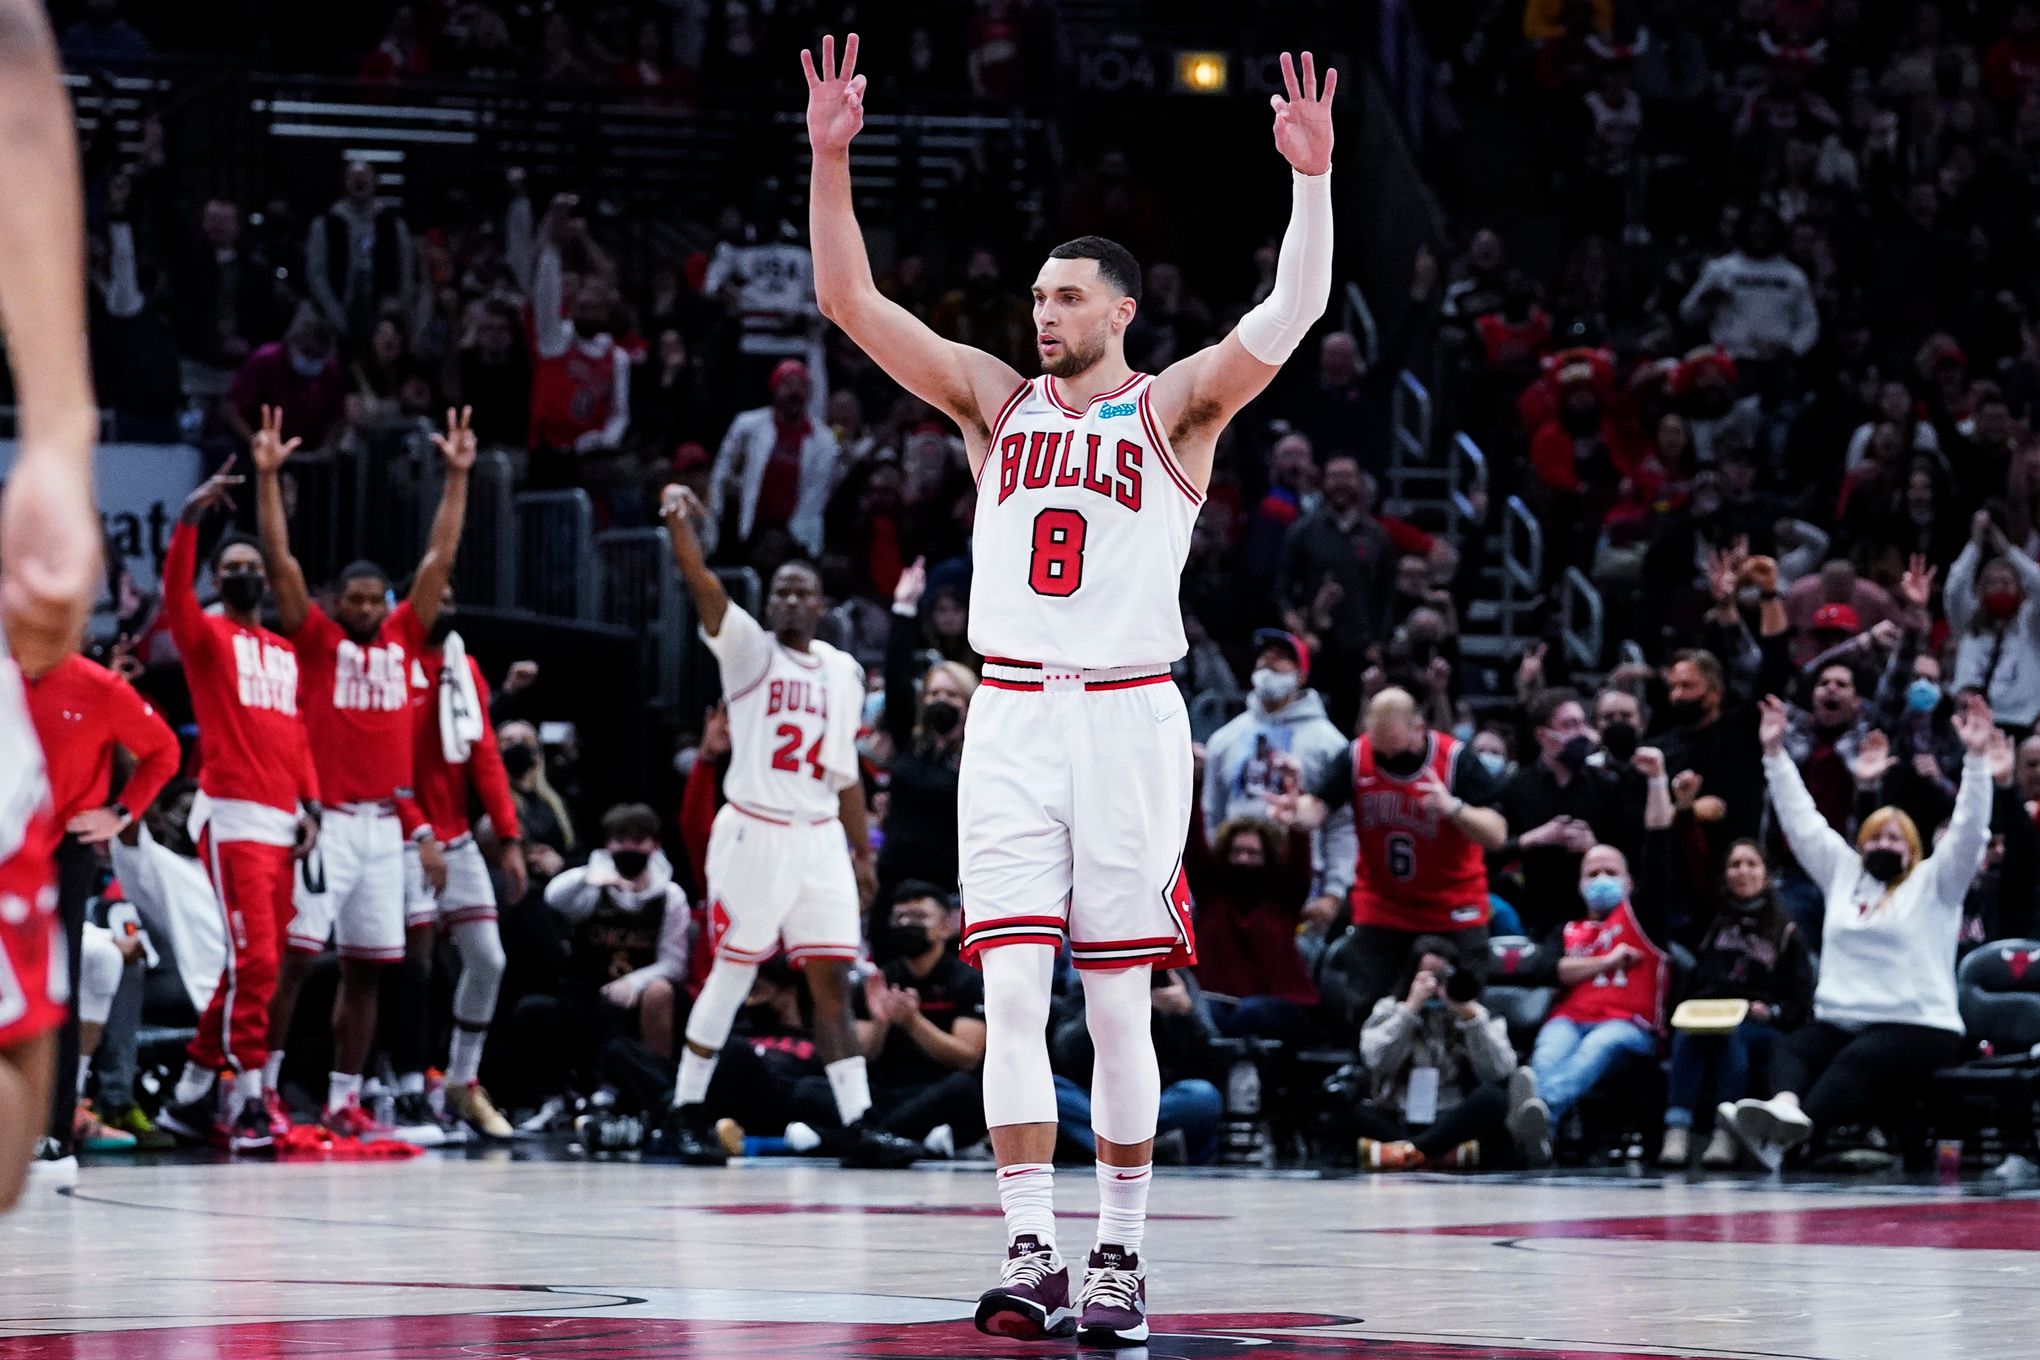 BREAKING: Zach LaVine will compete in the 3-Point Contest instead